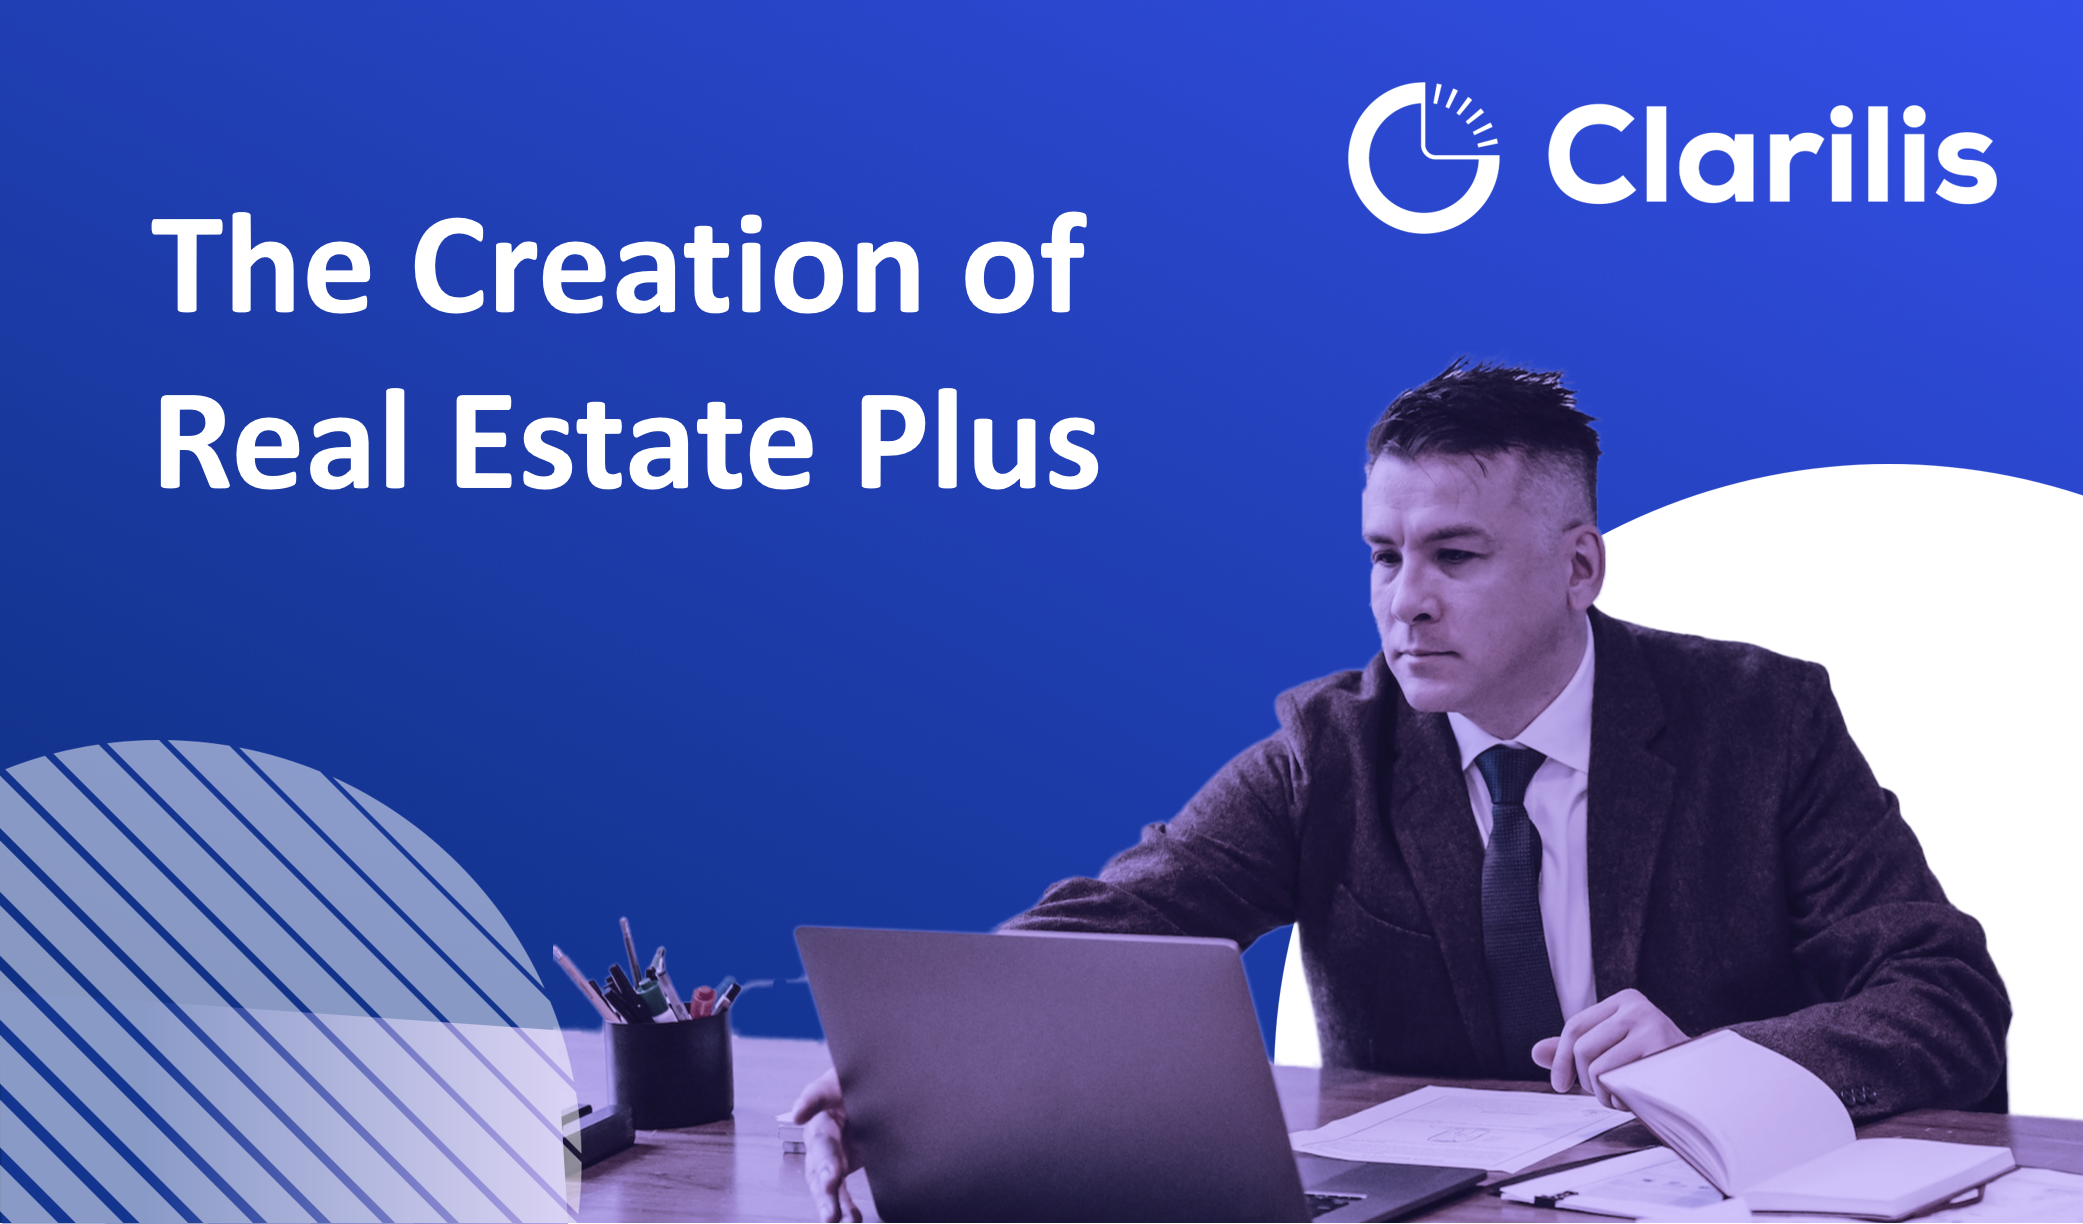 The Creation of Real Estate Plus